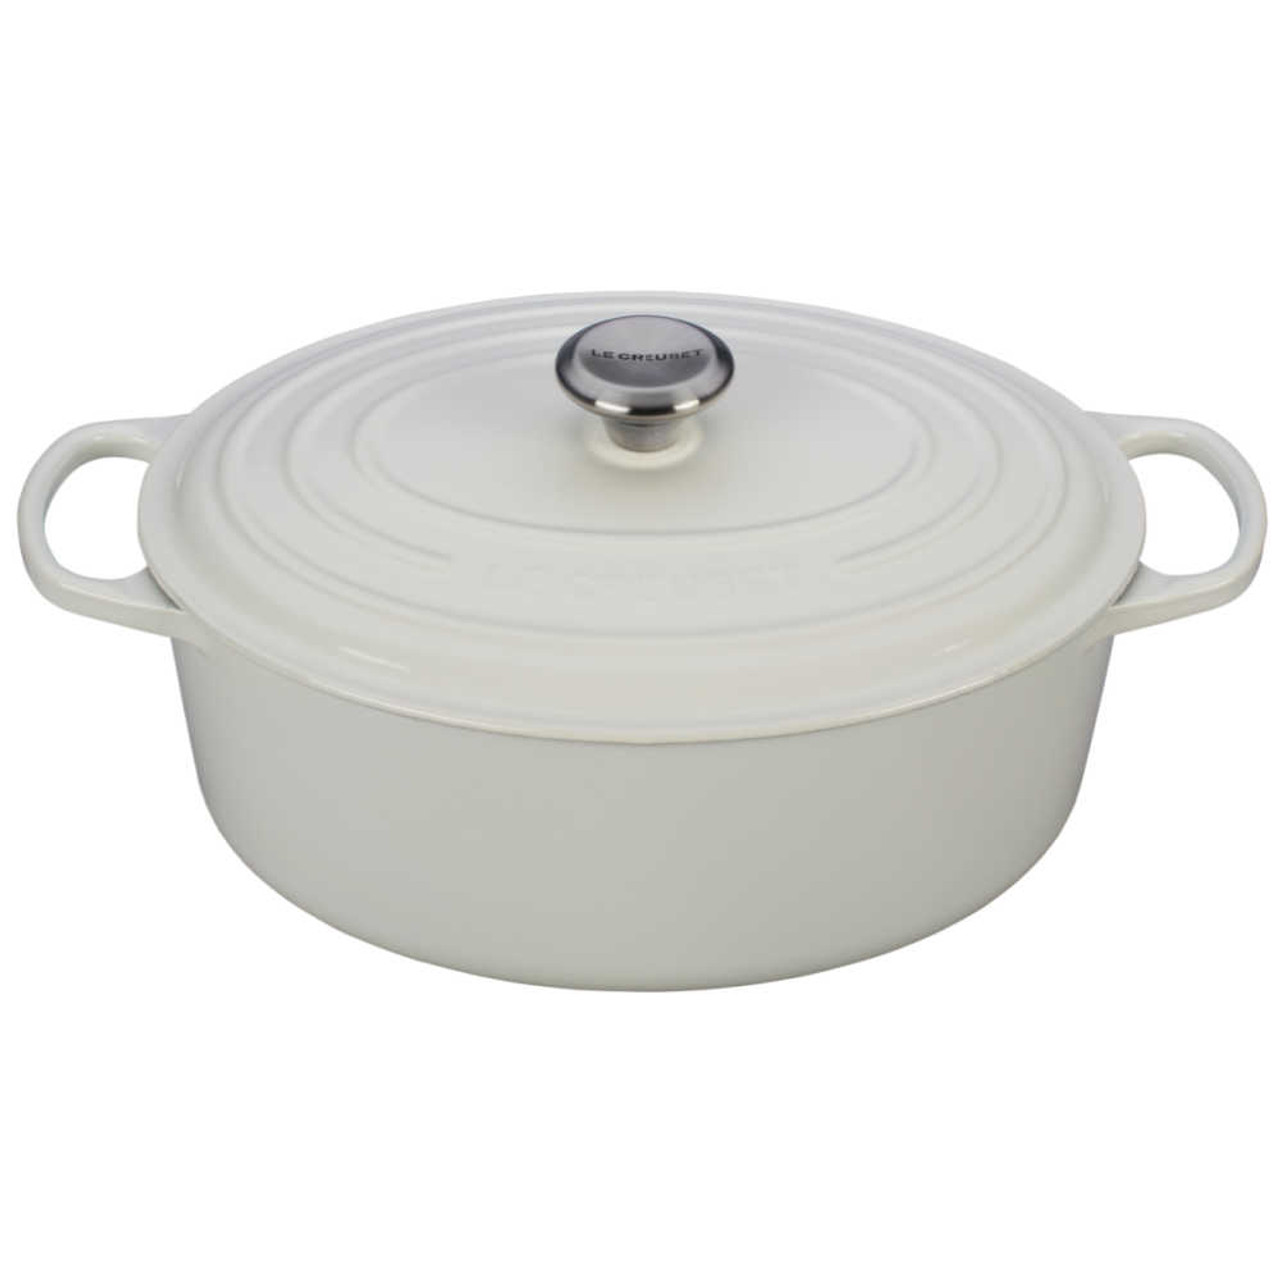 https://cdn11.bigcommerce.com/s-hccytny0od/images/stencil/1280x1280/products/1804/17557/Le_Creuset_Oval_Dutch_Oven_White__74331.1639706327.jpg?c=2?imbypass=on